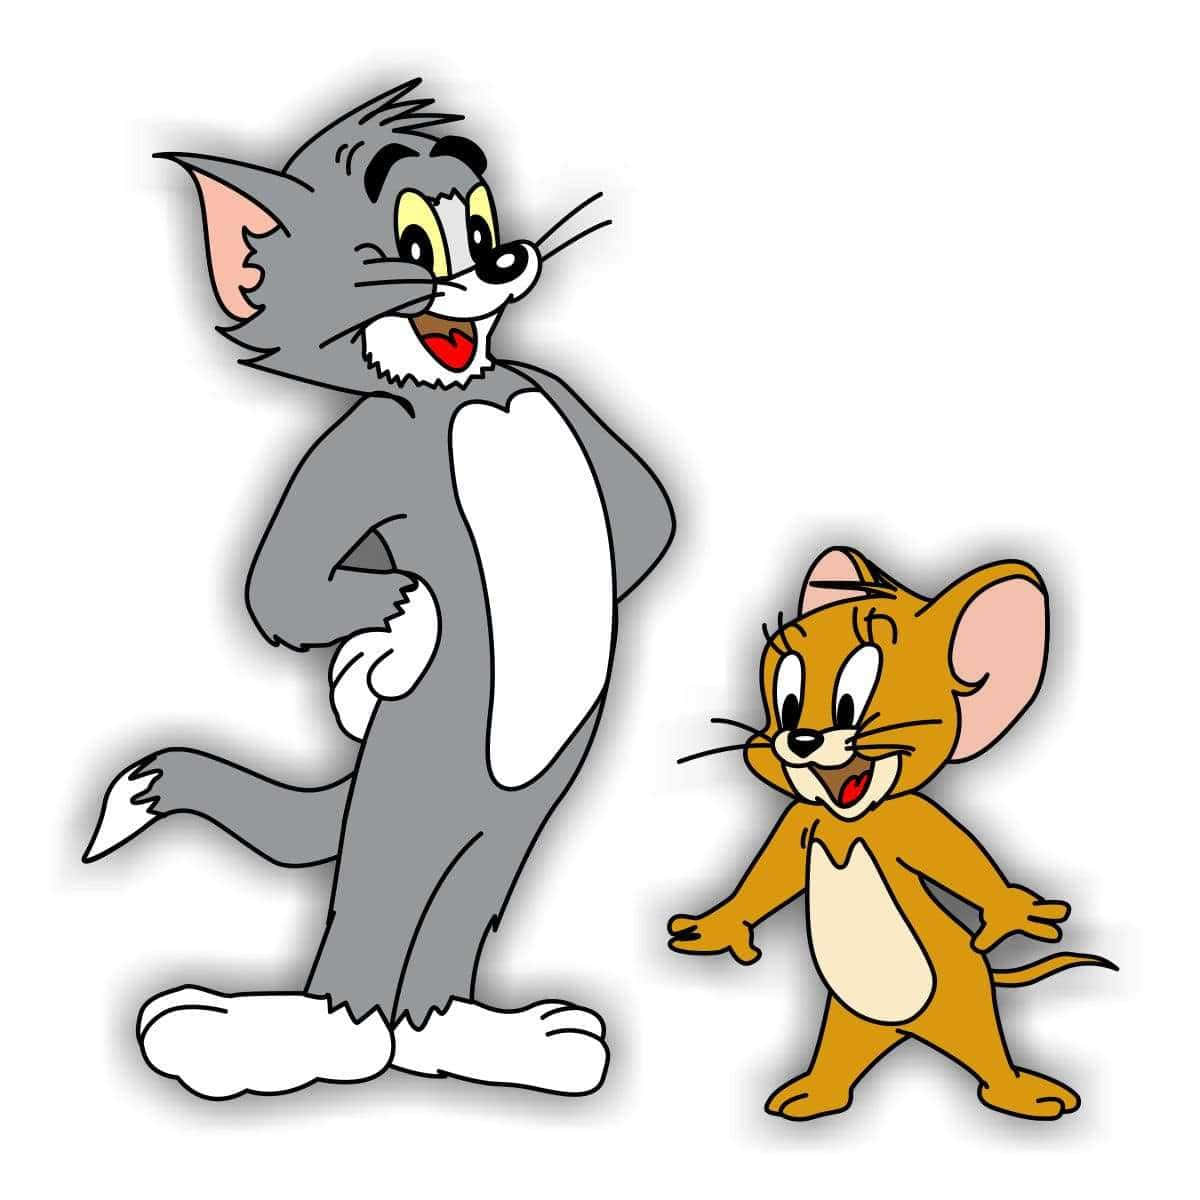 Join Tom and Jerry on their hilarious adventures as they chase